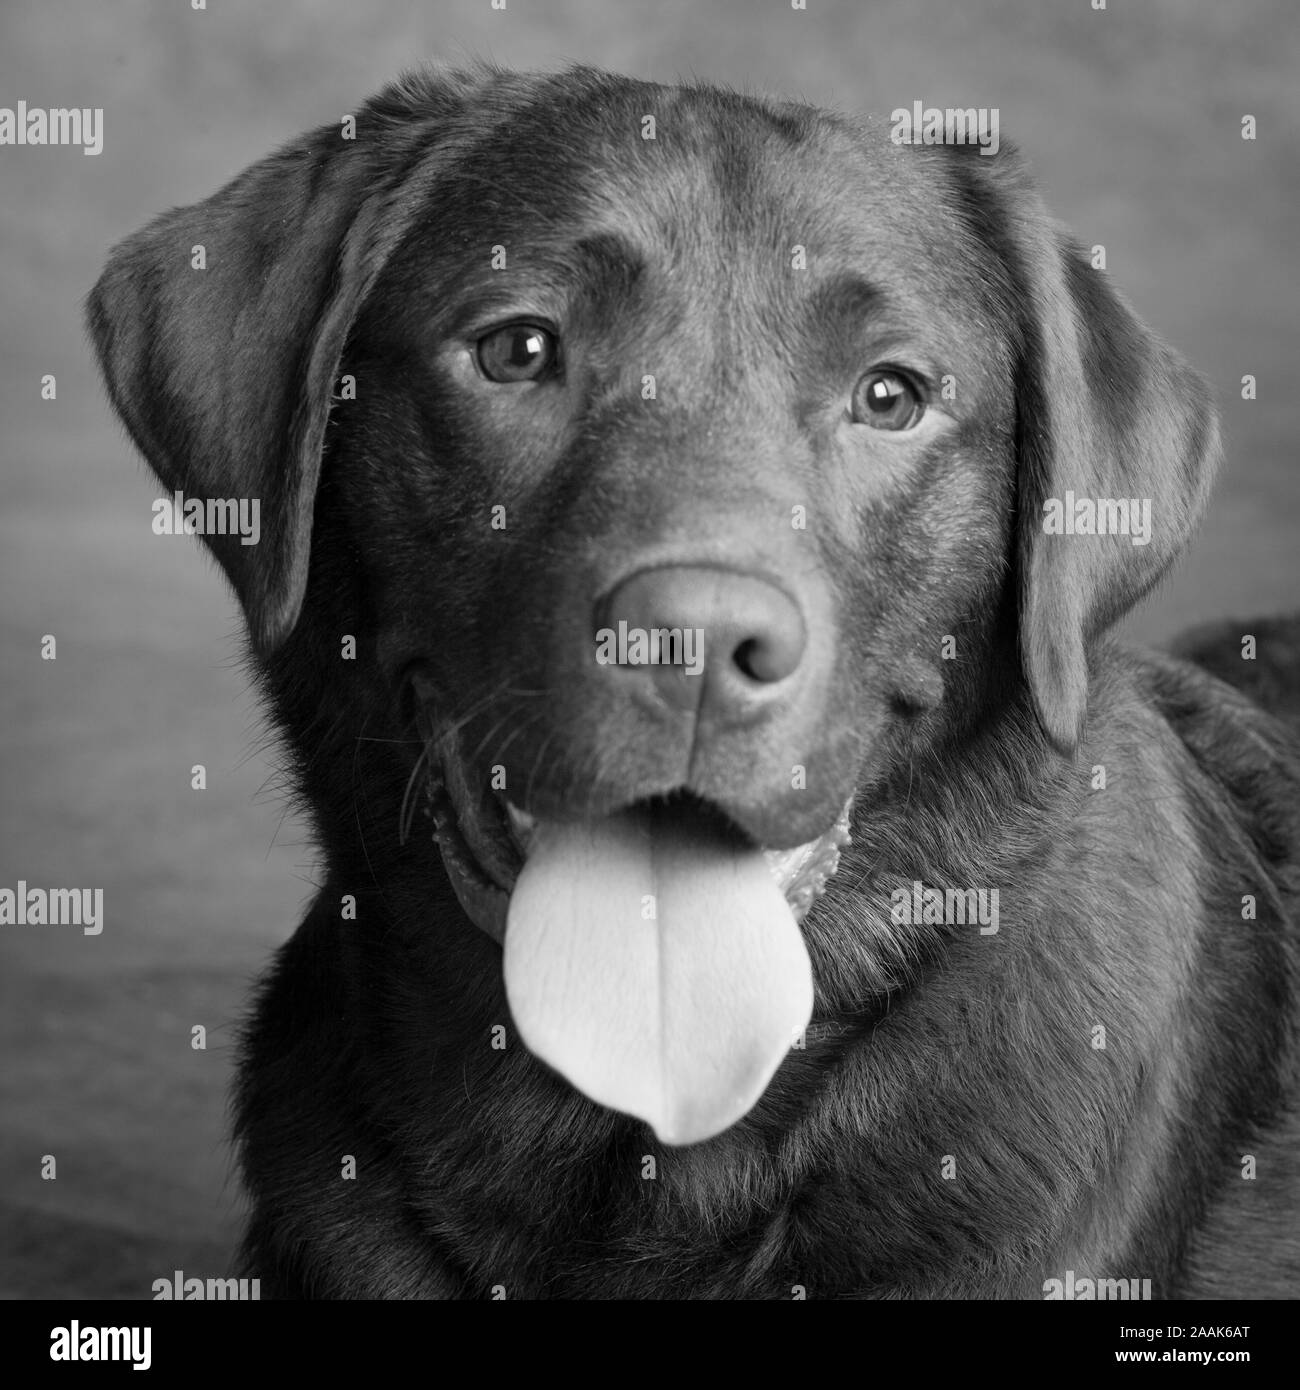 Portrait of Chocolate Labrador sticking out tongue Stock Photo